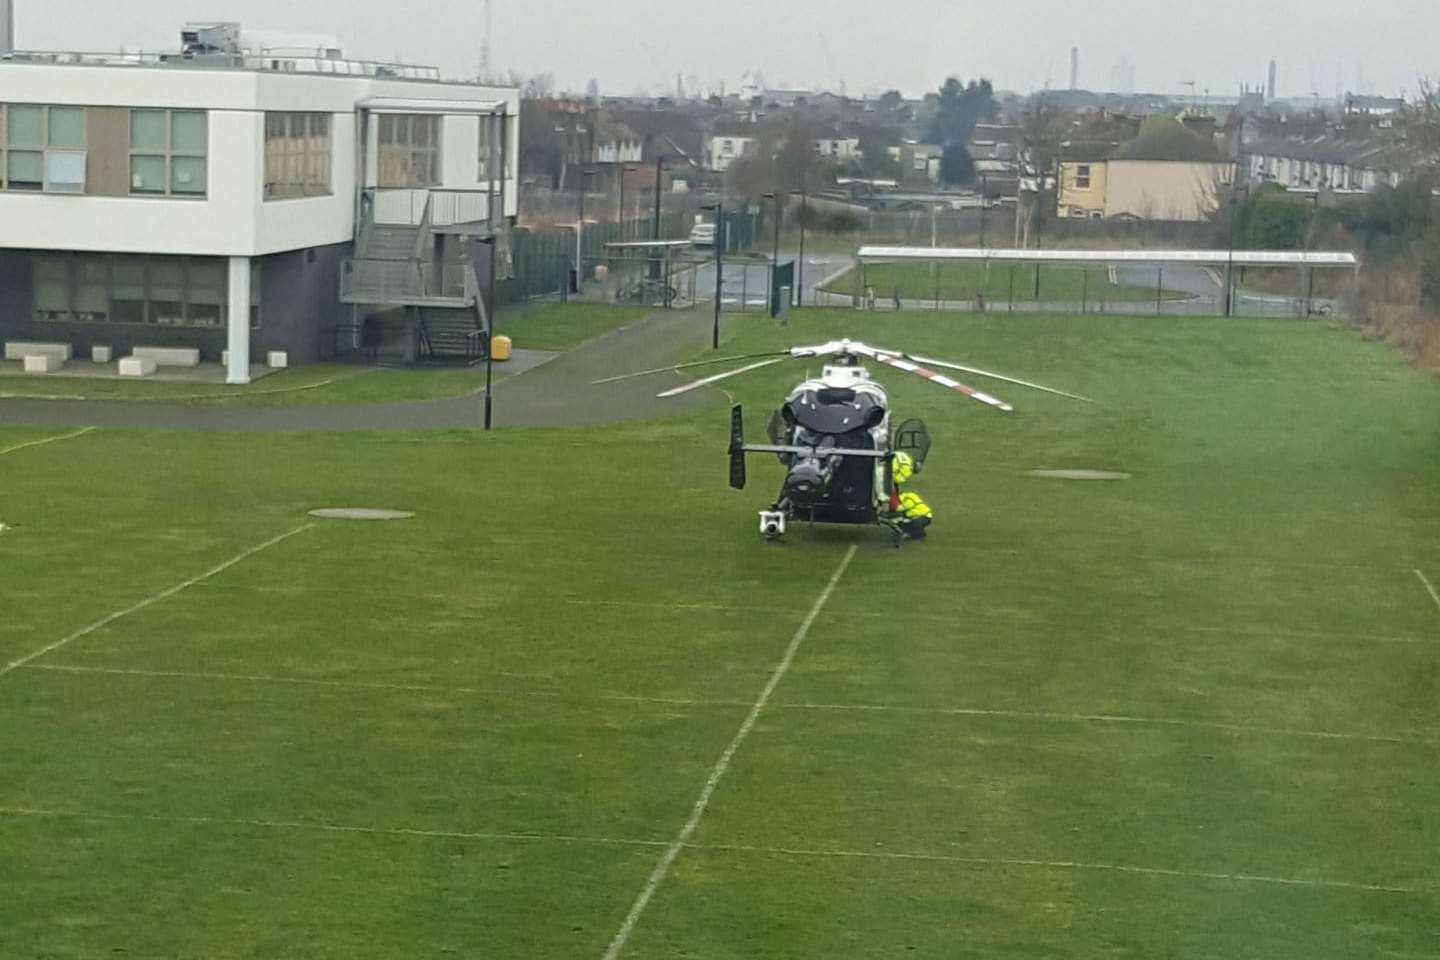 The air ambulance in the Isle of Sheppey Academy's field. Picture: Kirsty Elmes